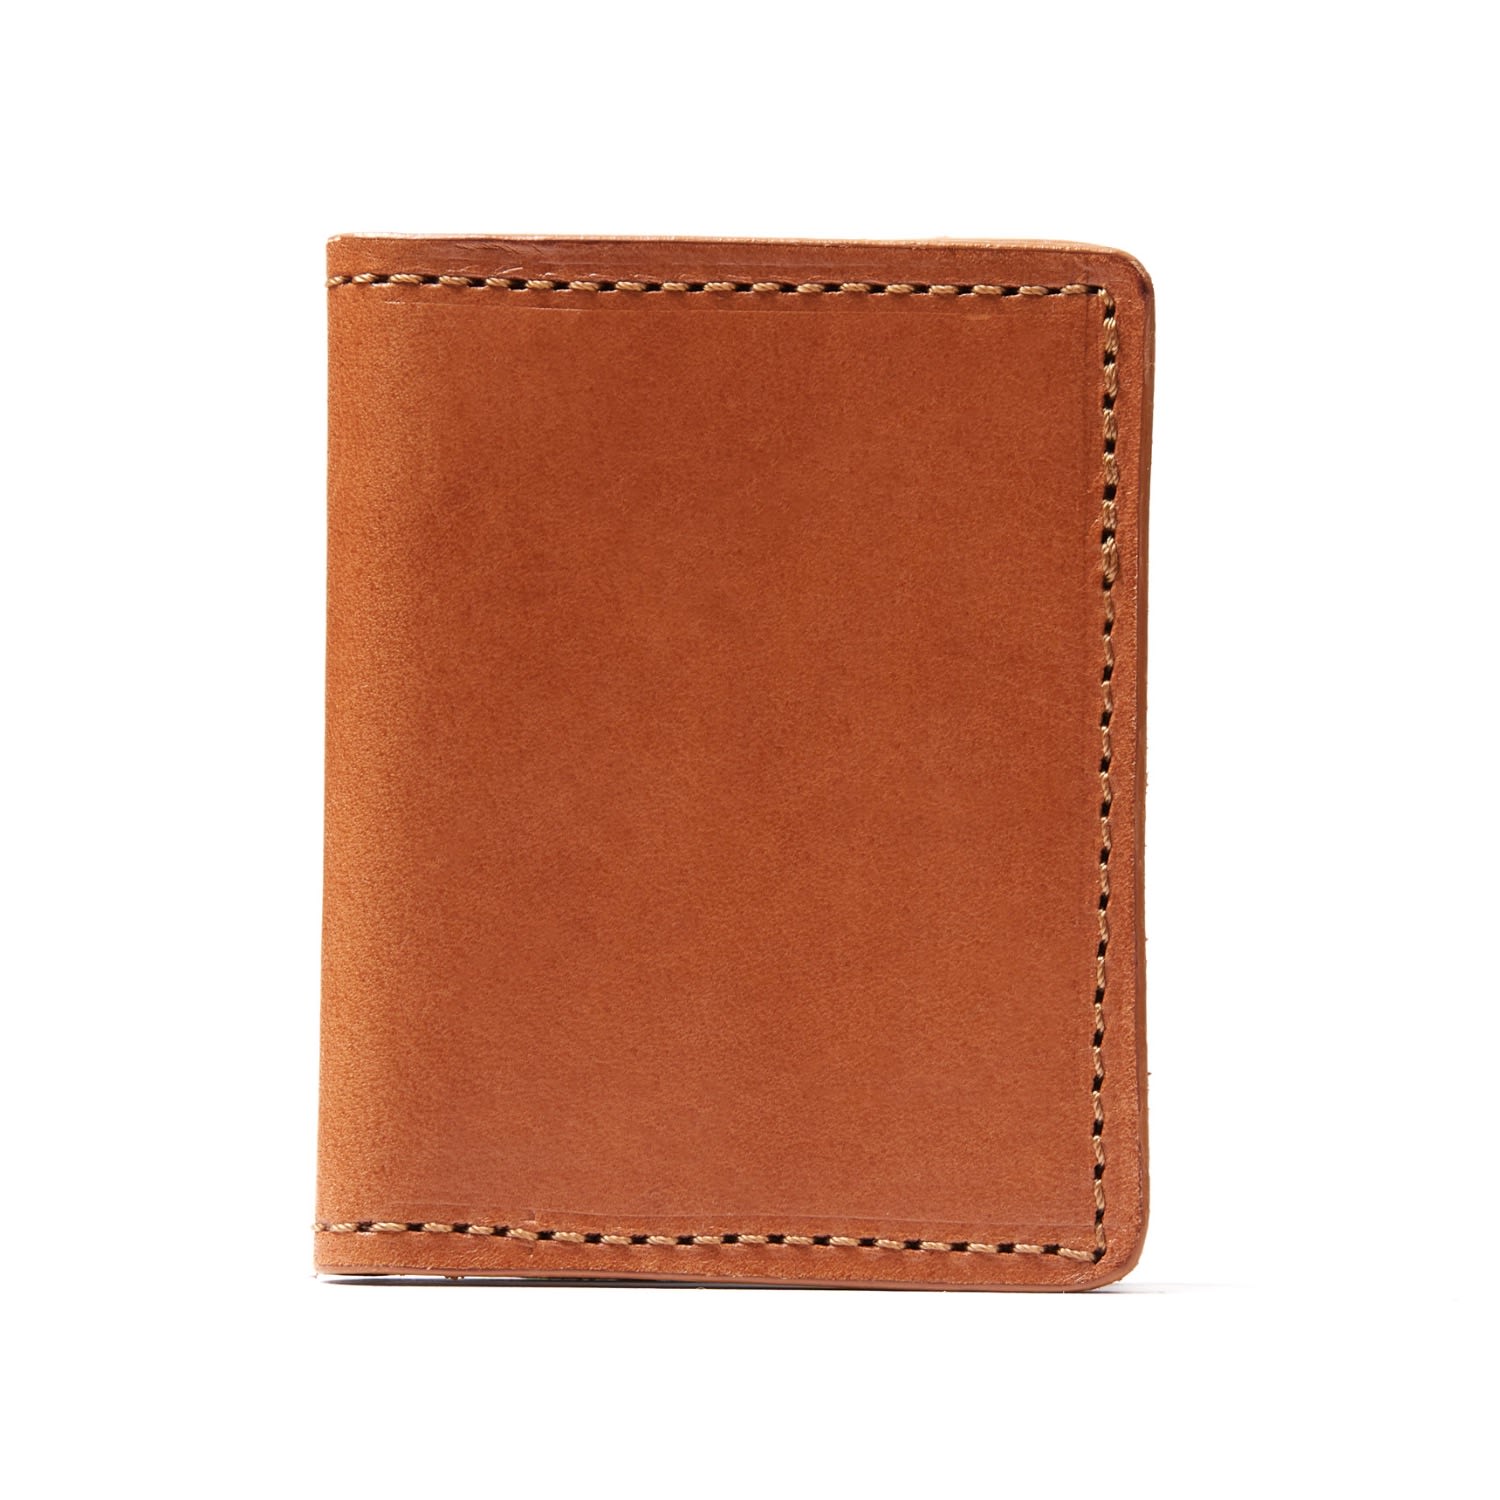 The Dust Company Men's Leather Cardholders In Cuoio Brown New York Style